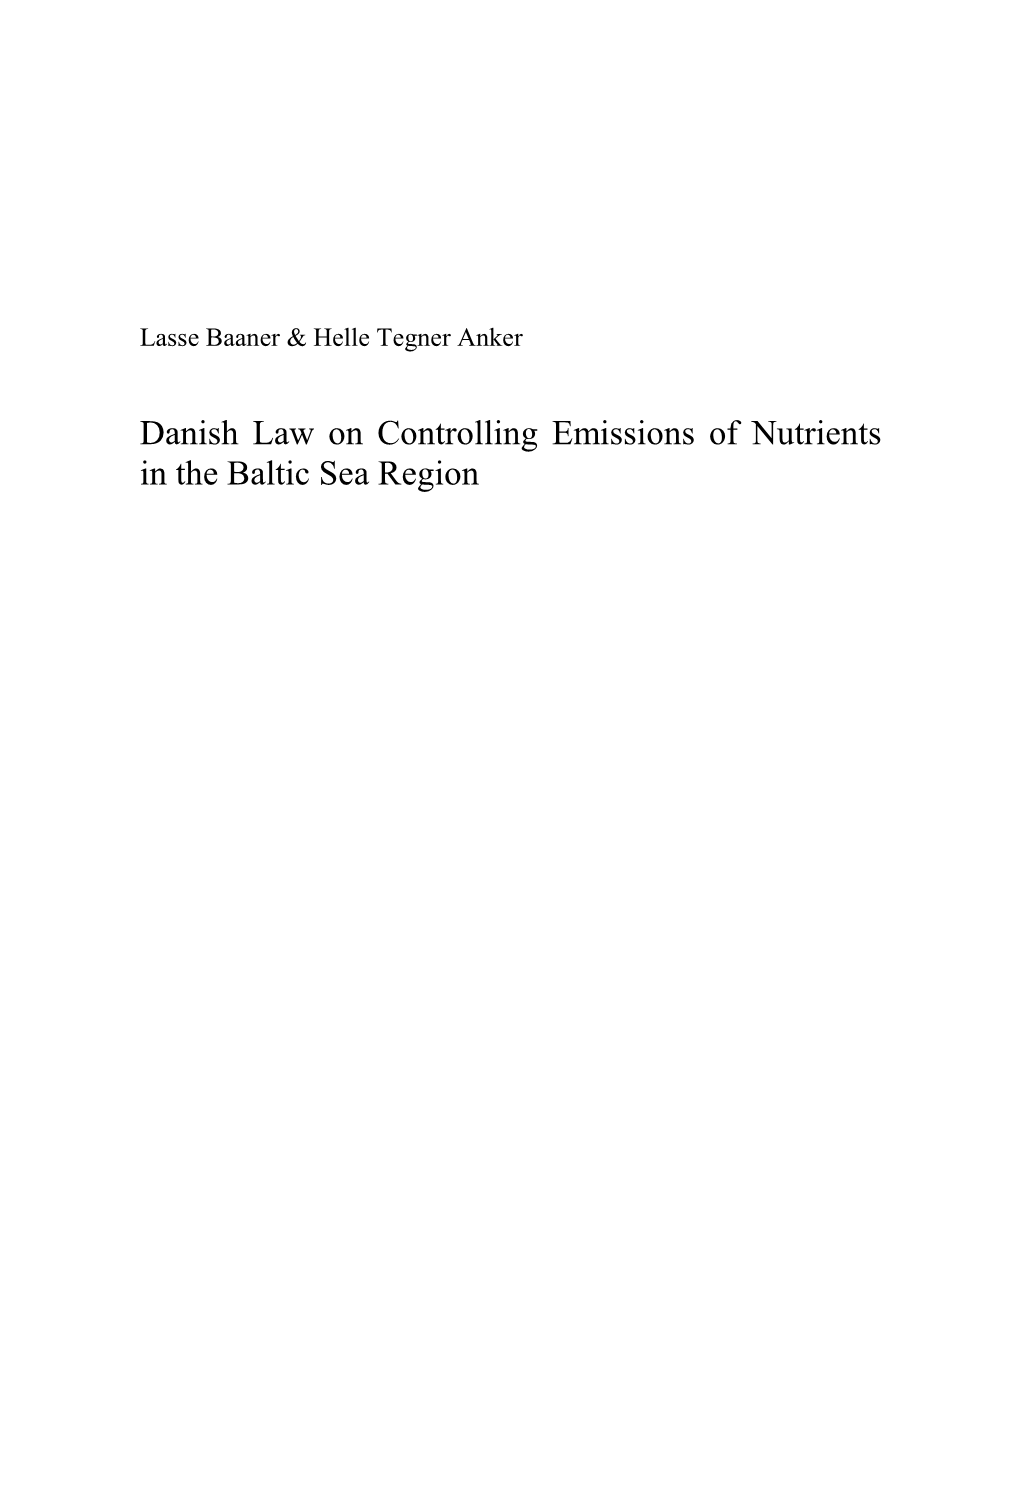 Danish Law on Controlling Emissions of Nutrients in the Baltic Sea Region